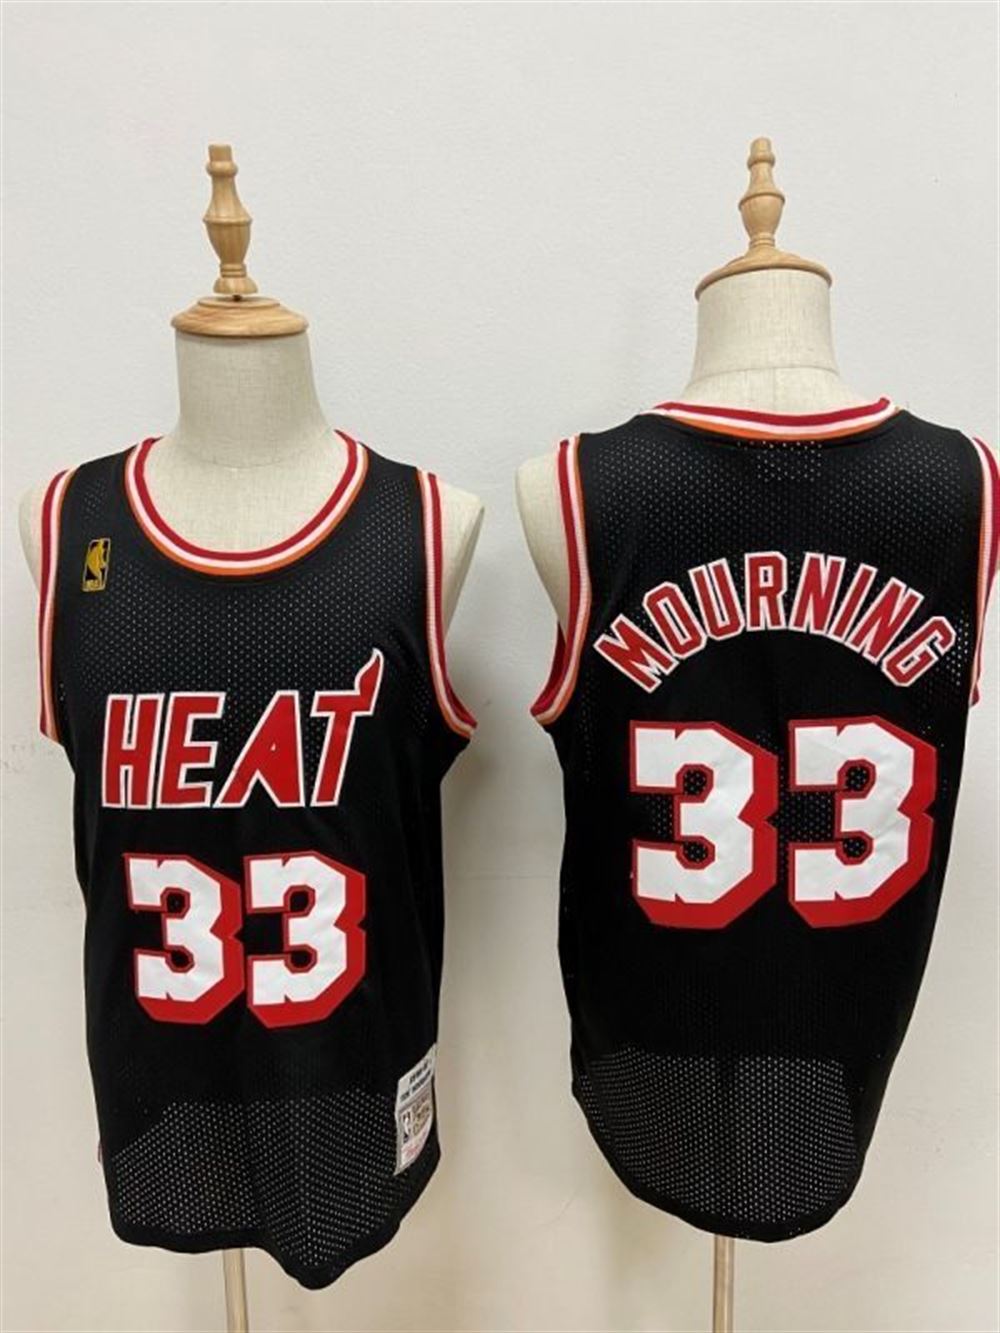 Miami Heat Alonzo Mourning 33 Nba 2020 New Arrival Black Jersey Jersey AllOver Print GRK4w